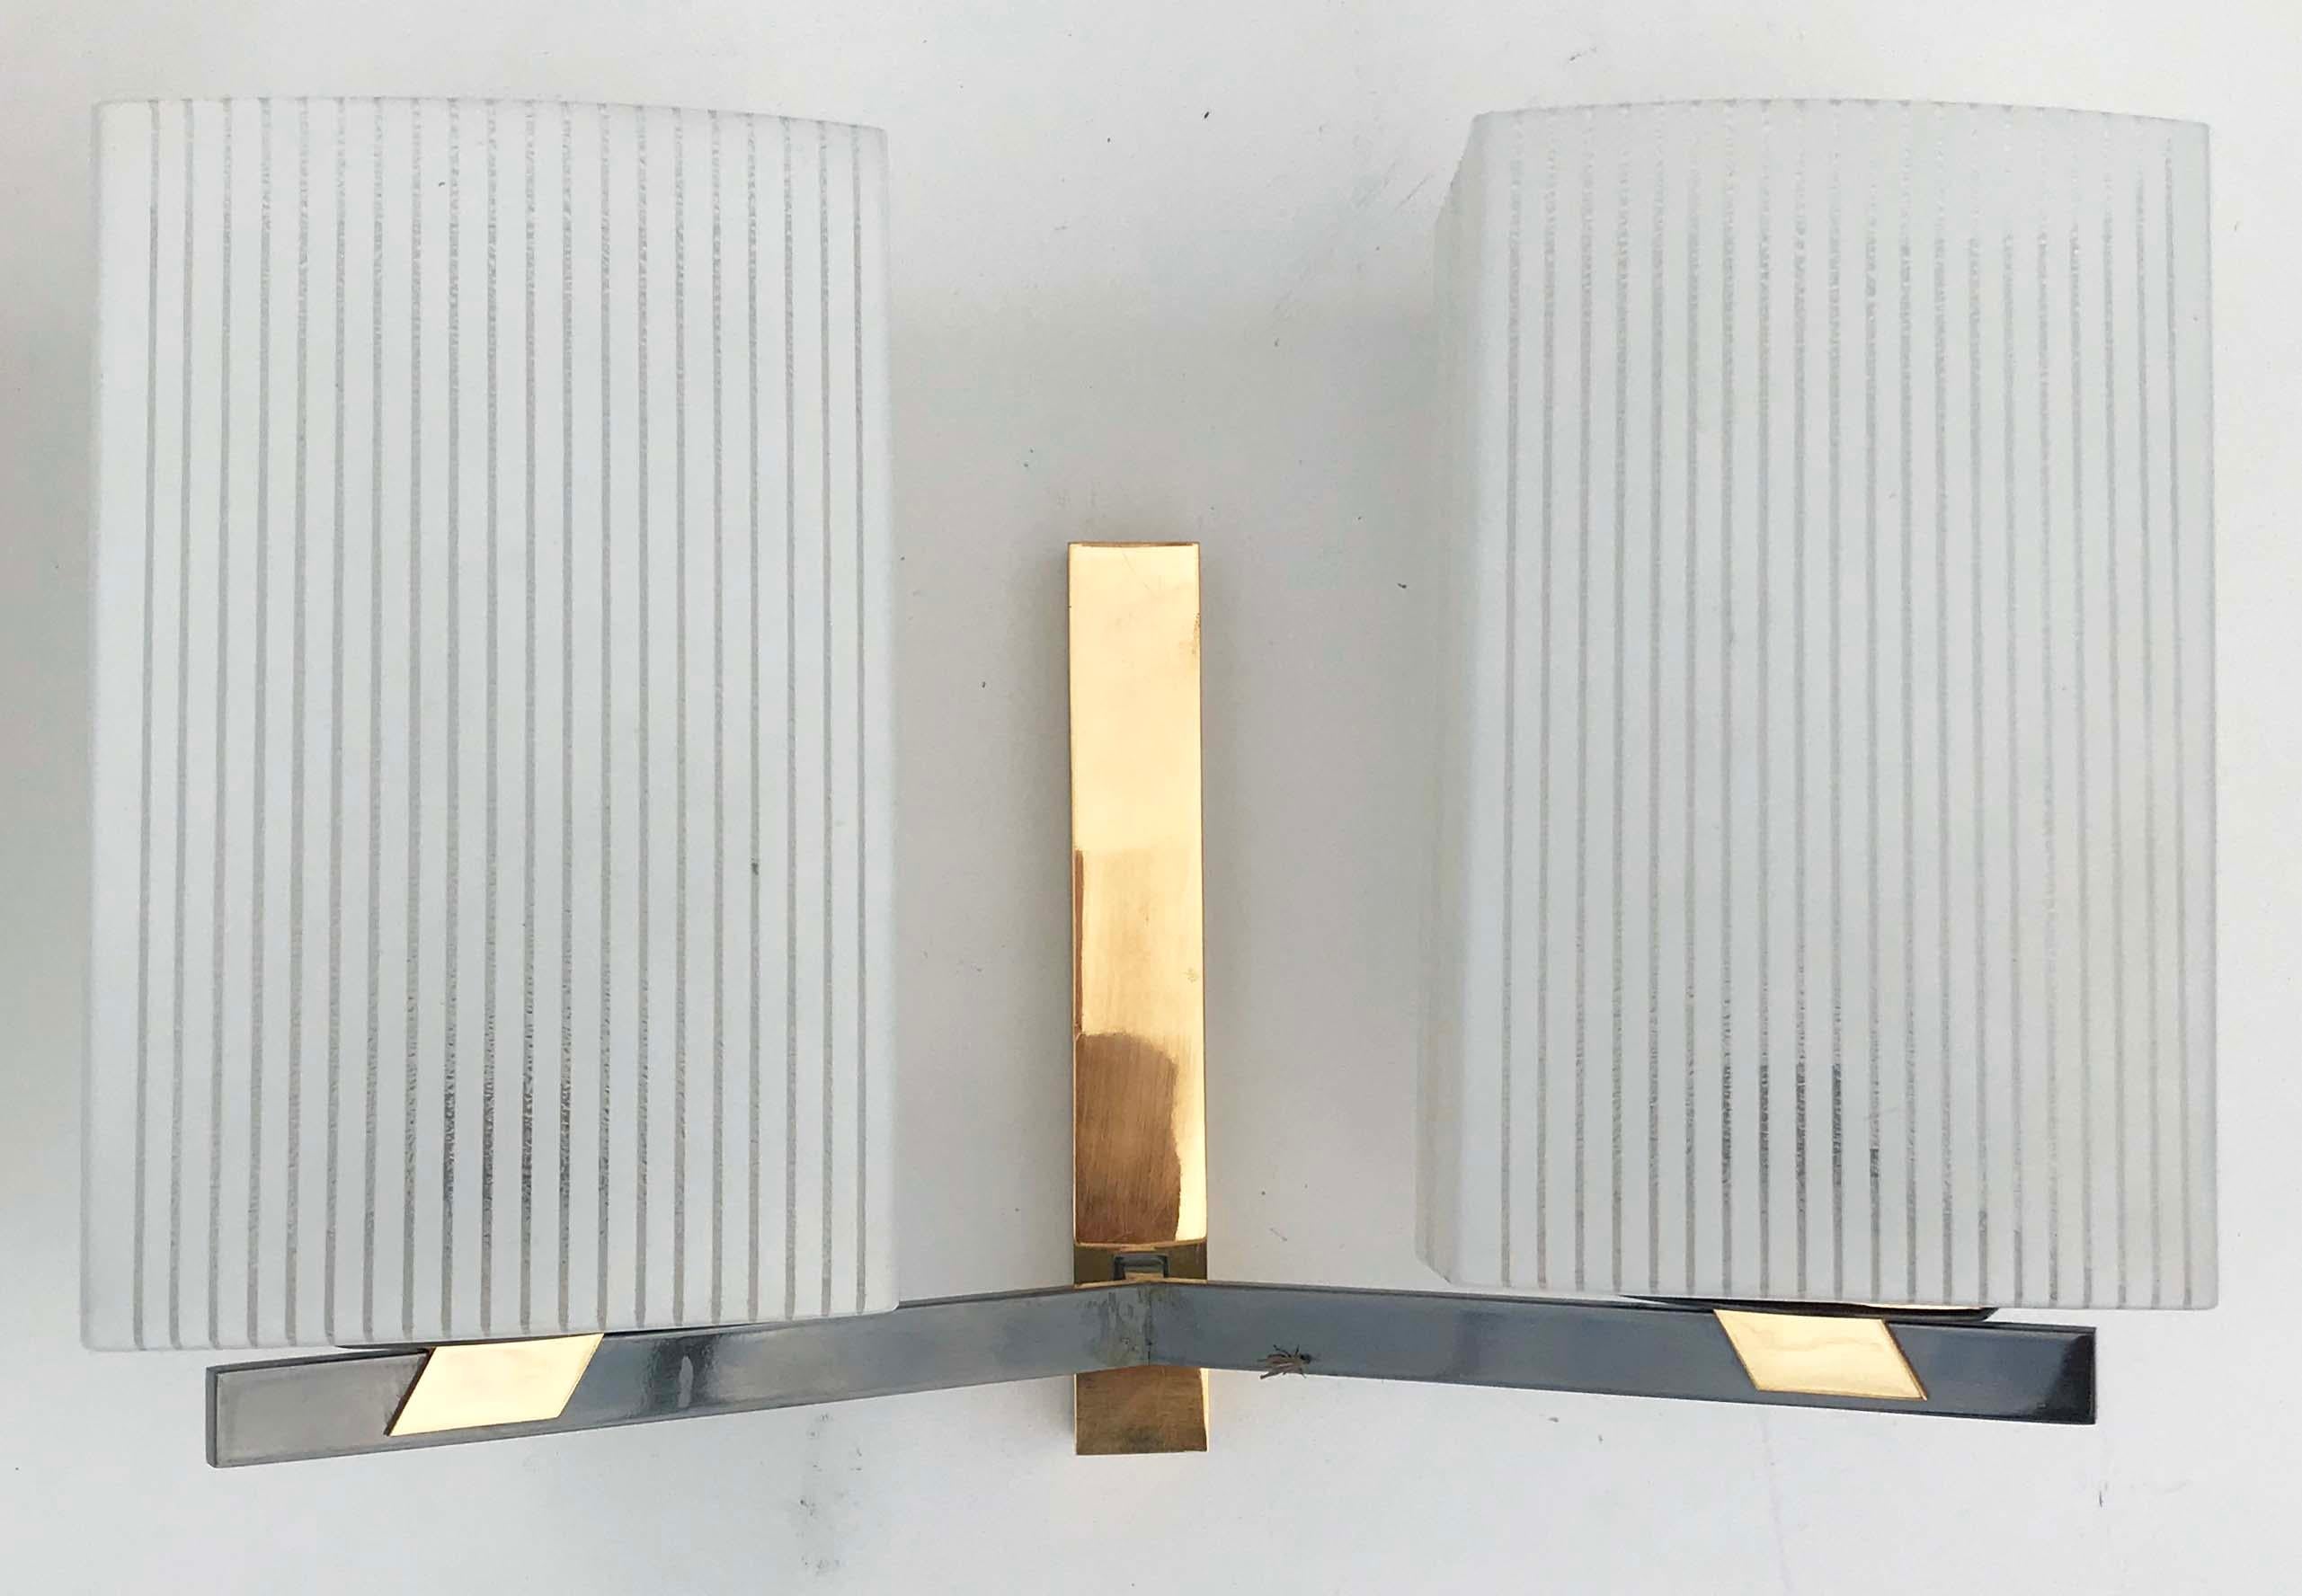 Superb pair of Maison Lancel sconces , 2 patina, gold plating and gun metal.
Very good original finish
Original opalines in perfect condition
2 lights per sconces, 60 watts max bulb
Back plate: 7.7/8